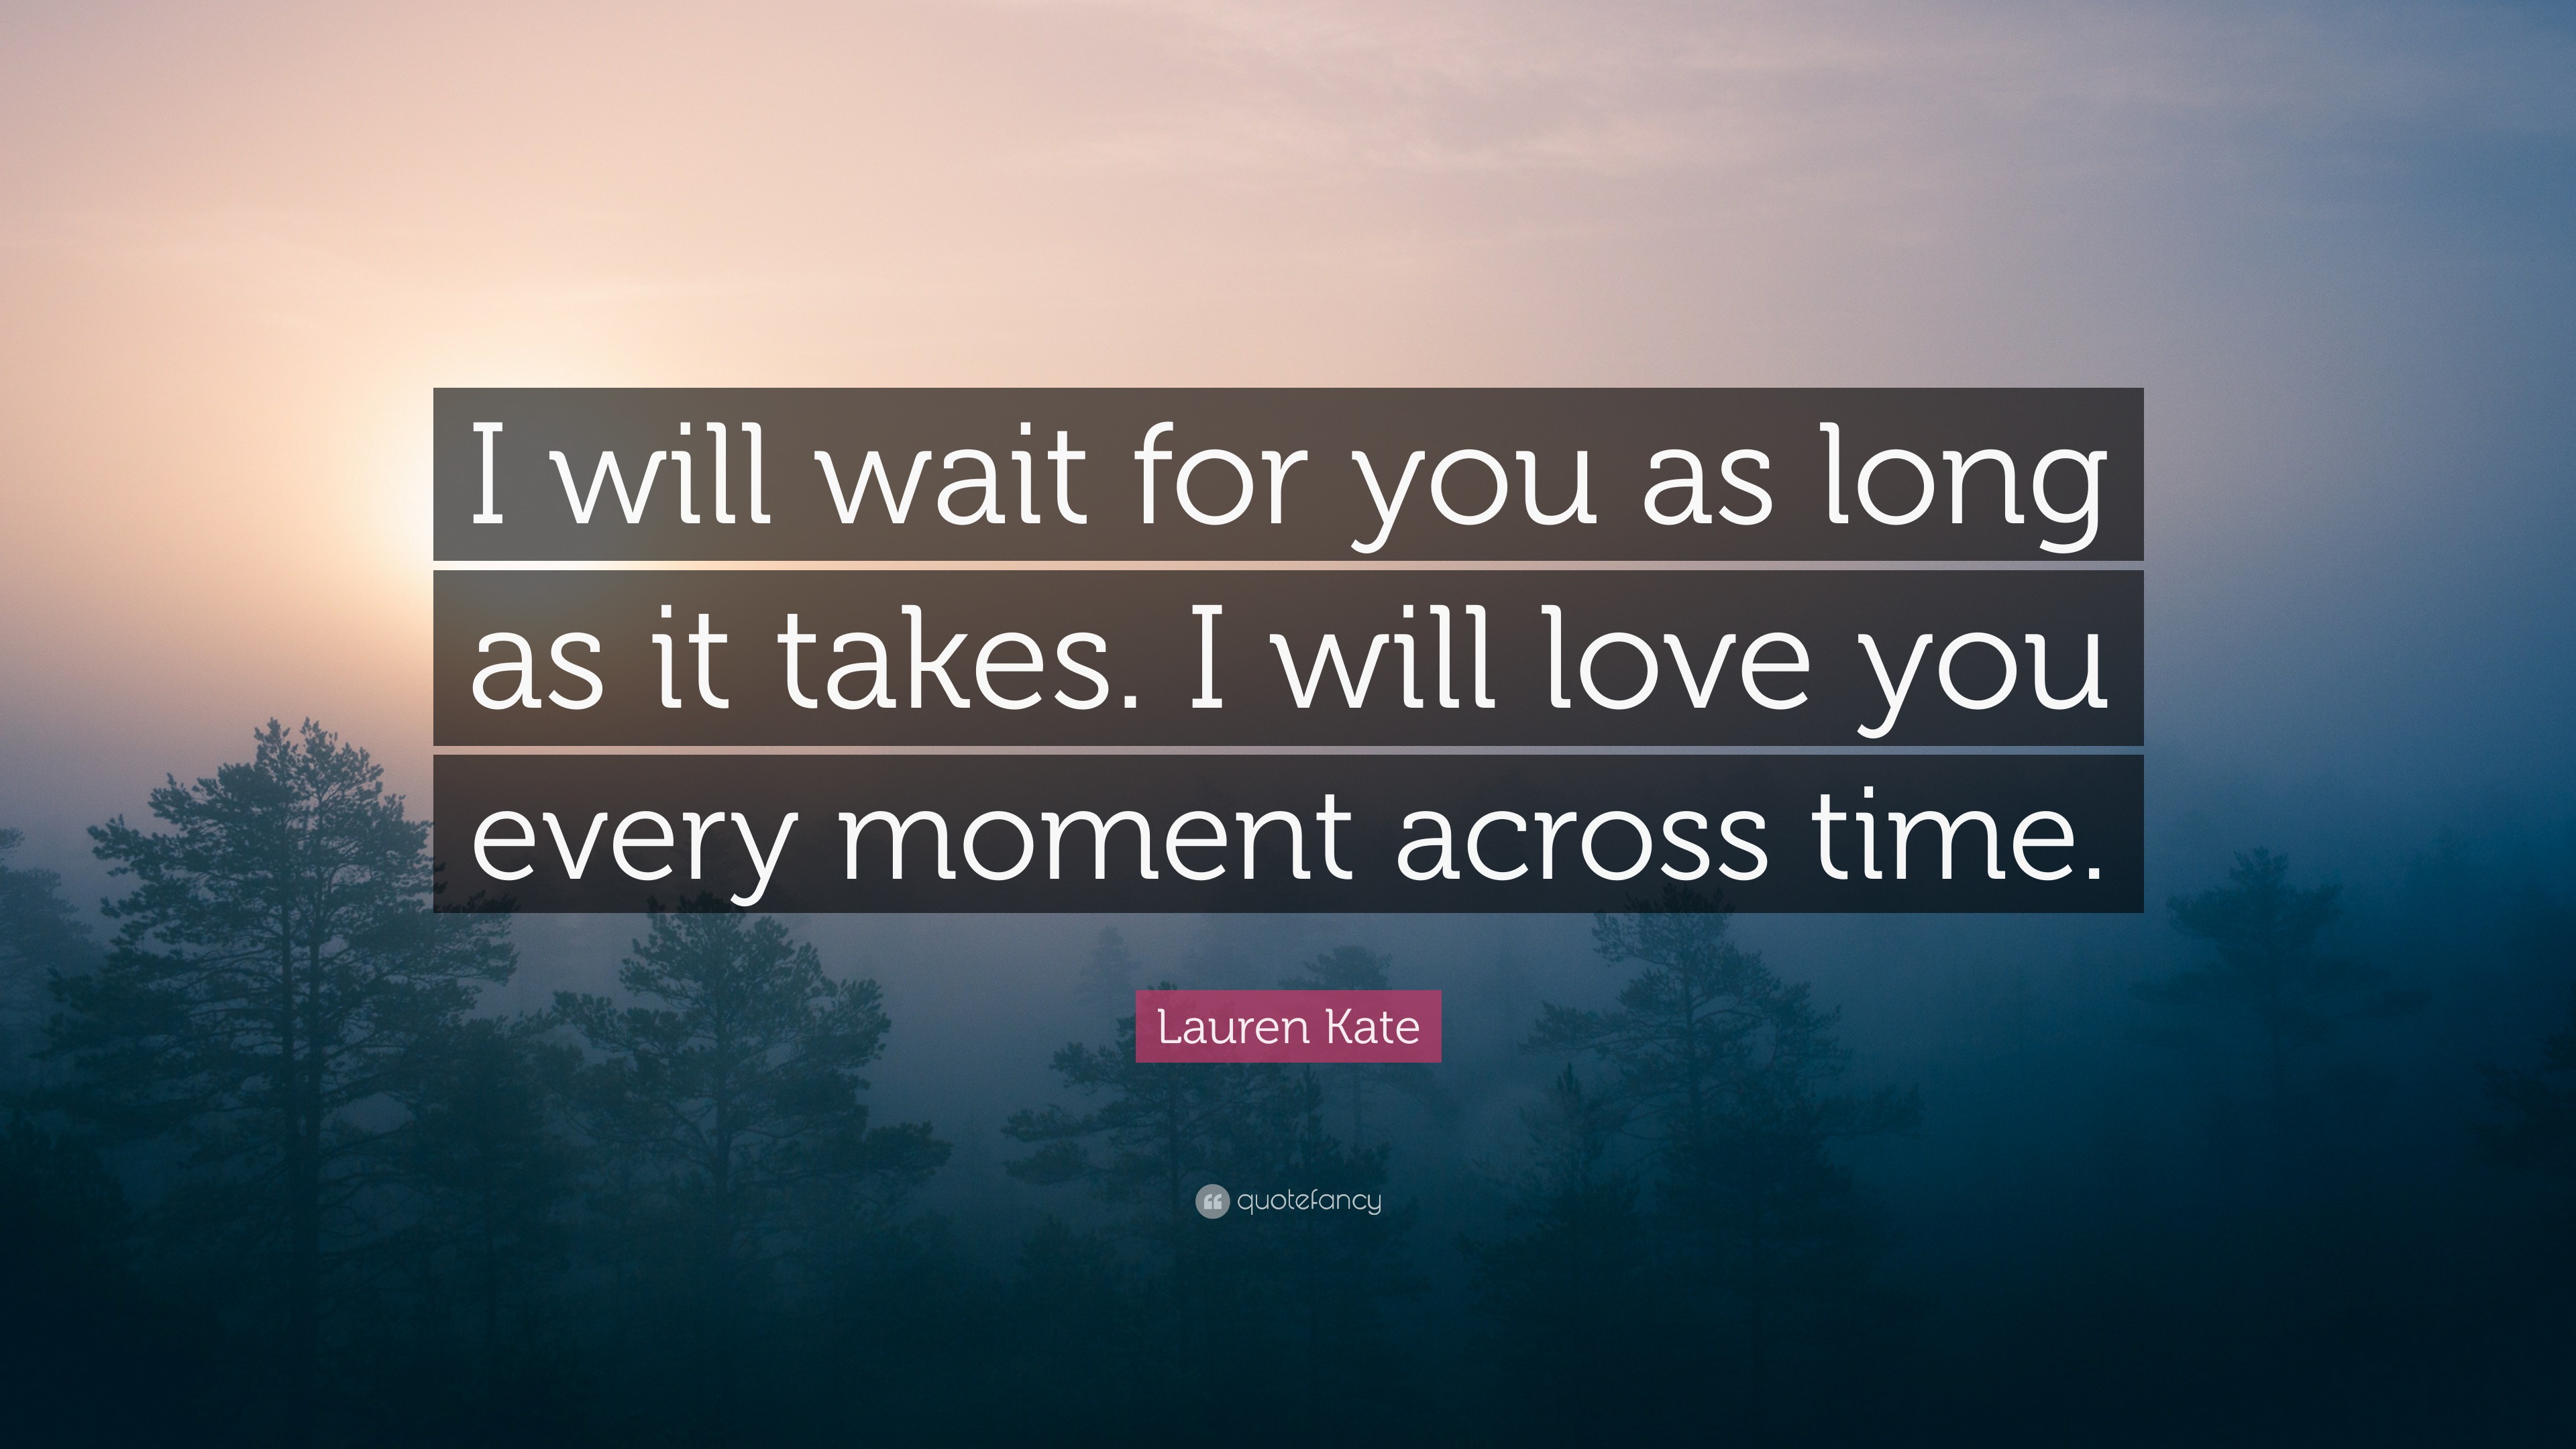 Waiting for you quotes 40 Quotes